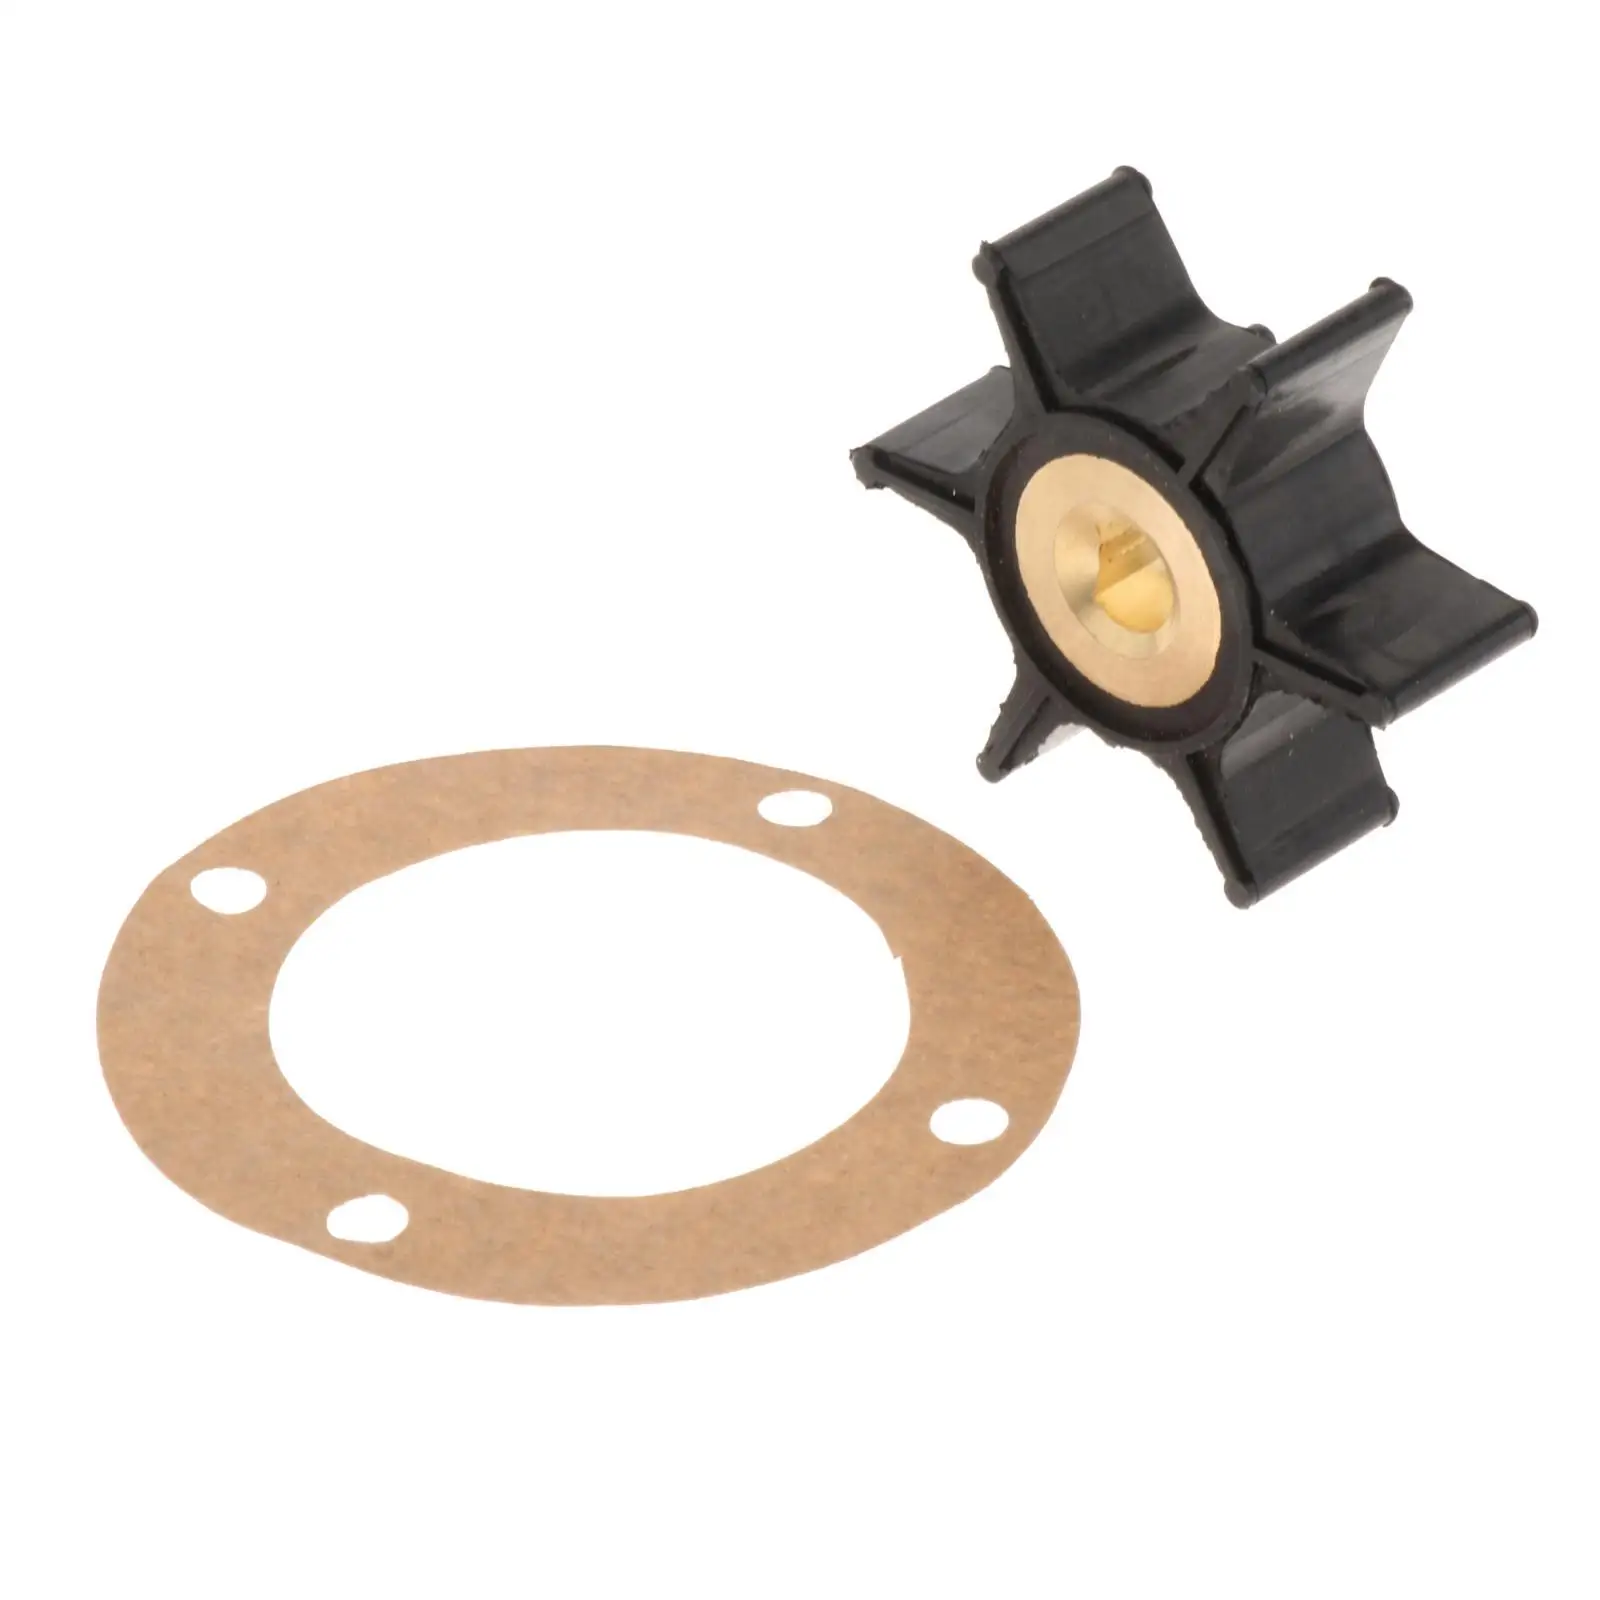 2x Impeller and 4-Hole Gasket , Supplies ,Repair Accessories ,Parts ,Impeller Replacement Fits for Onan 131-0386 170-317 Pump